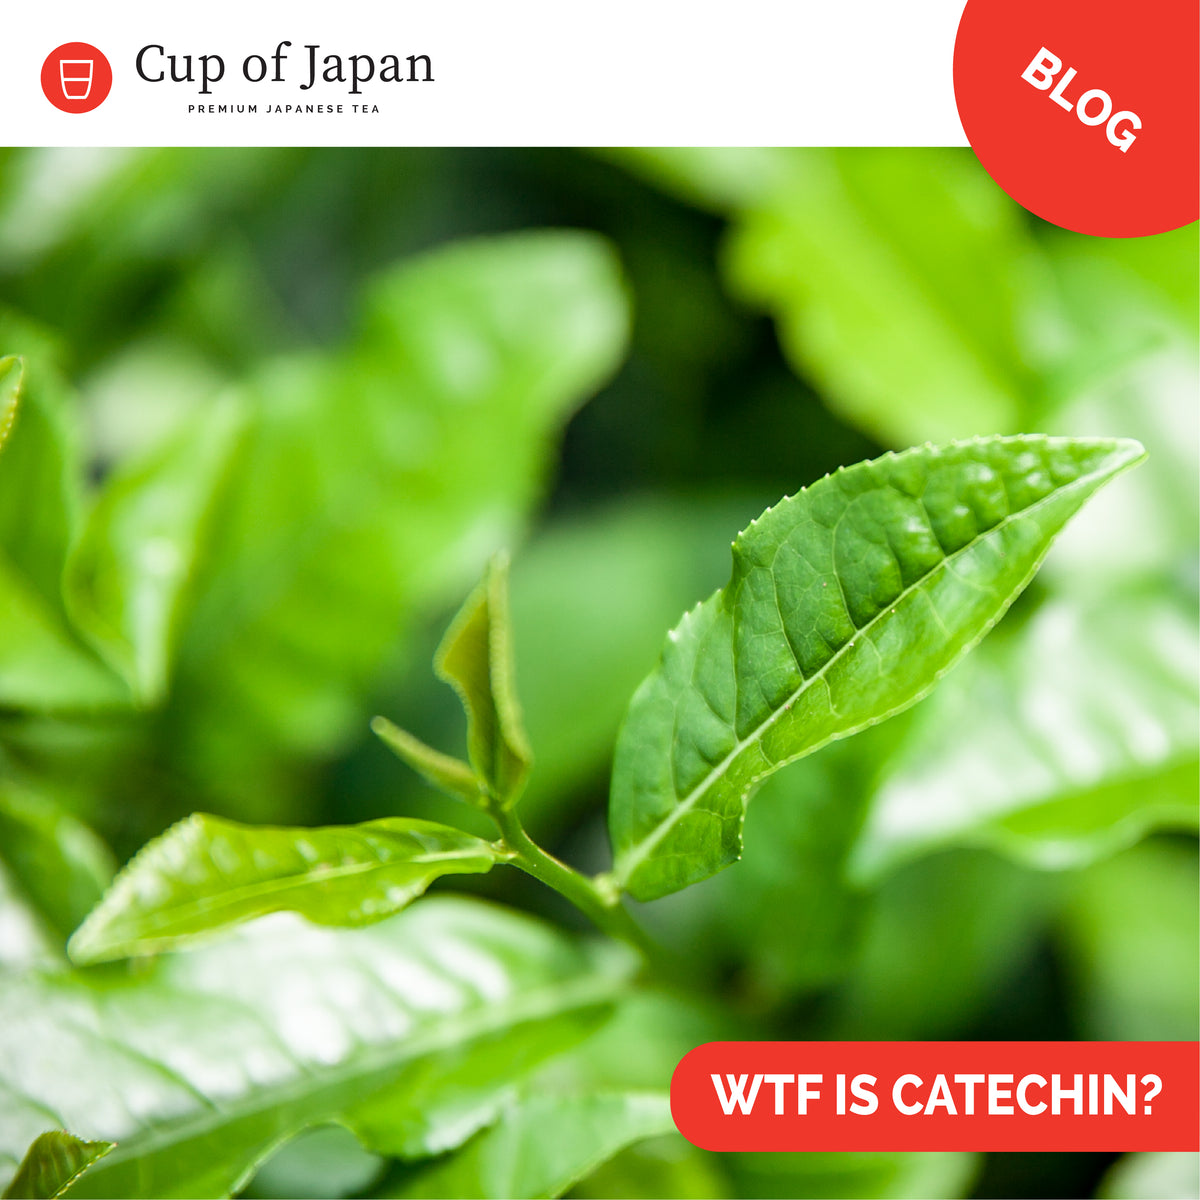 WTF is a Catechin?